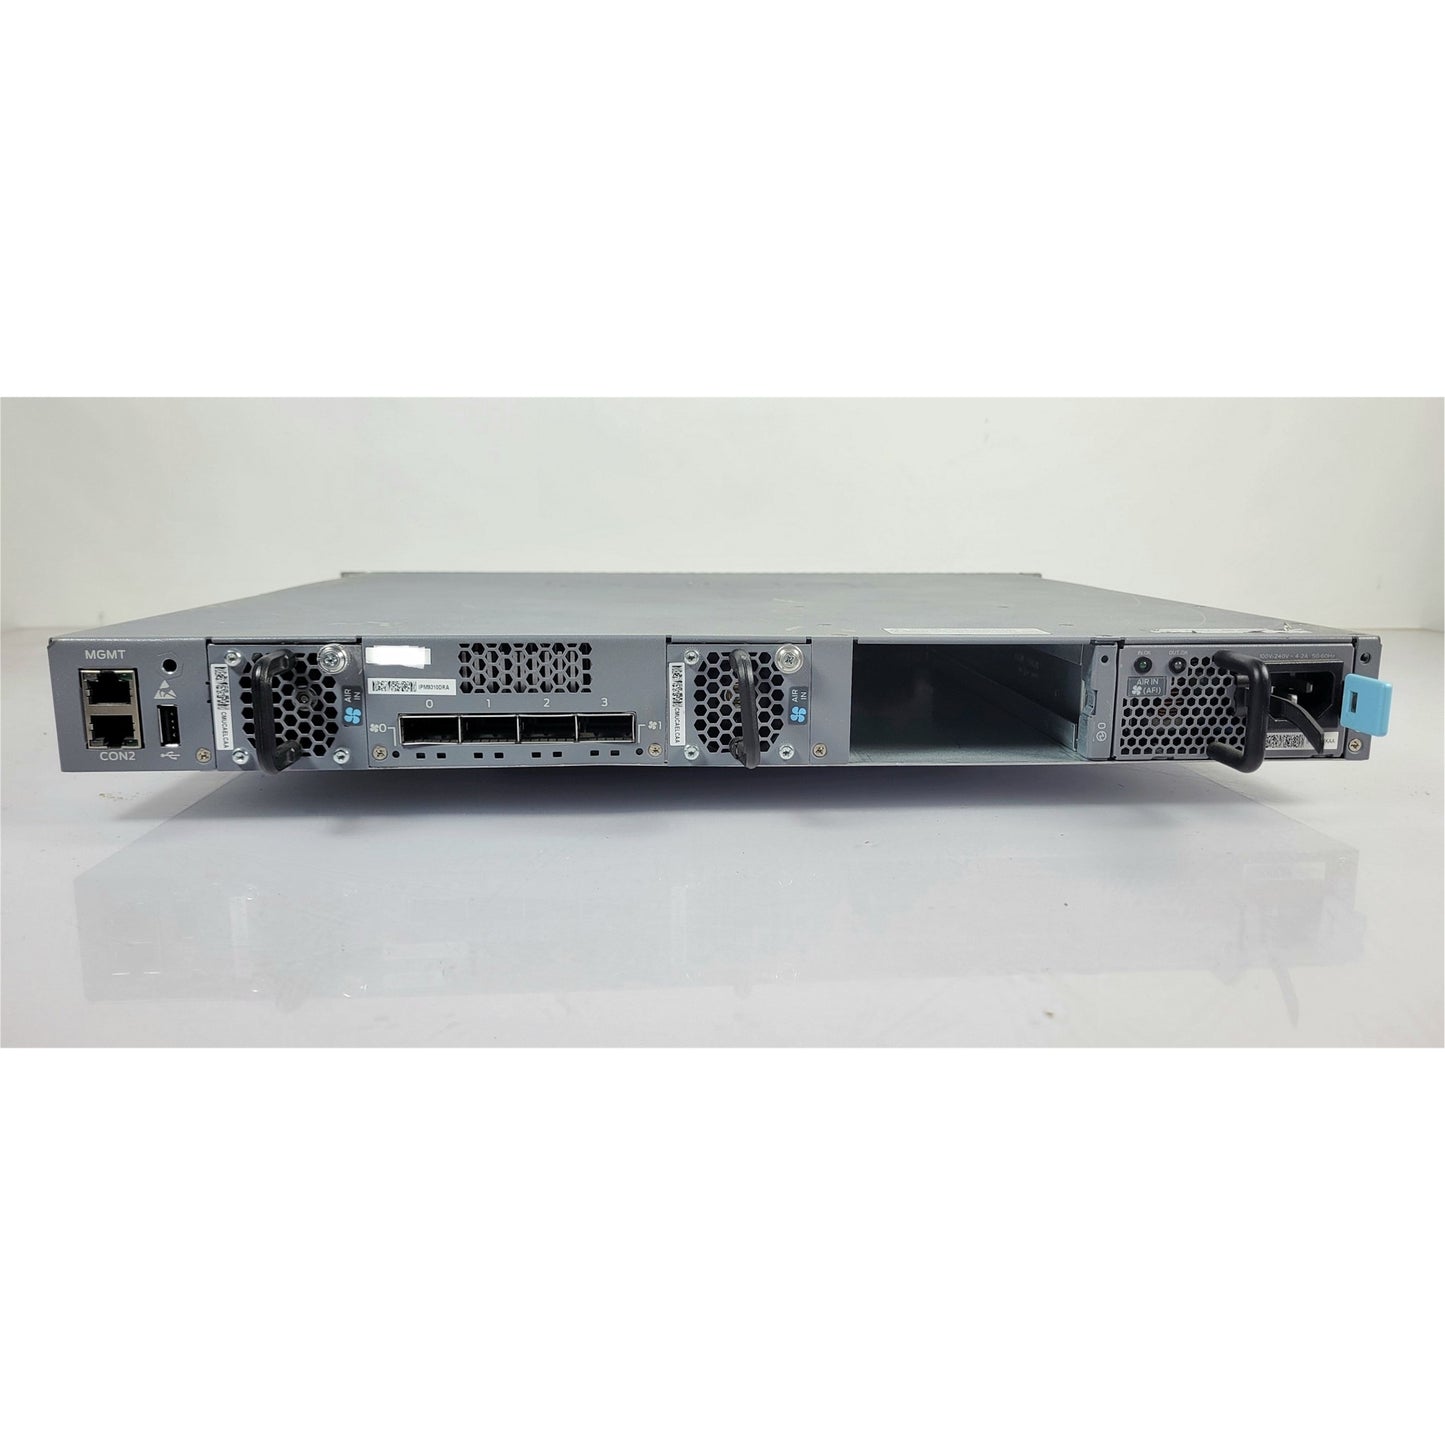 EX4300, 48-port 10/100/1000BaseT back-to-front airflow(inclu (Used - Good)